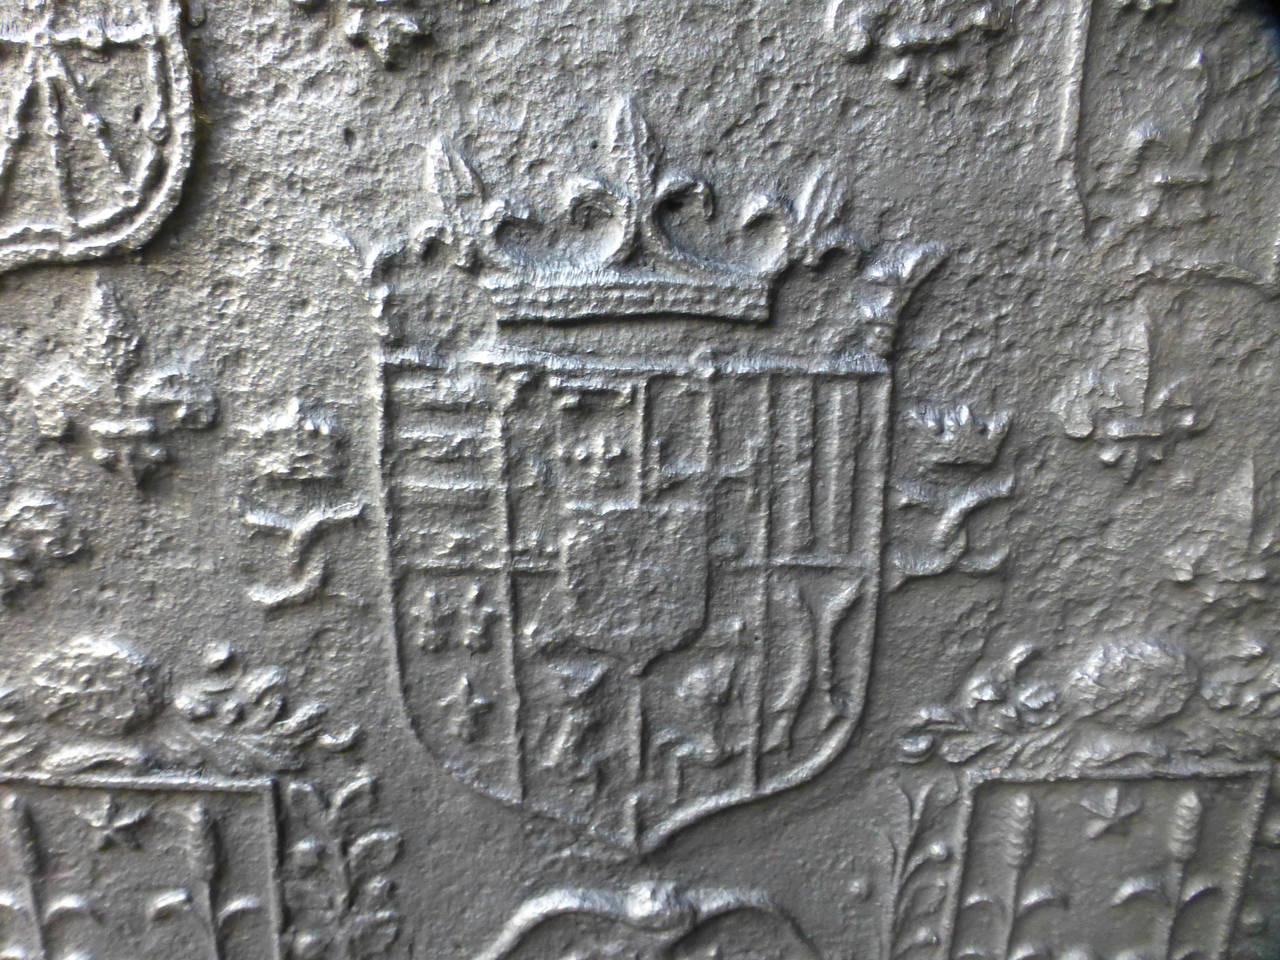 17th century French fireplace fireback with the arms of Lorraine (center), flanked by the arms of Bar-le-Duc and the arms of France and Navarre (left and right upper sides). The arms at the bottom side are of unknown origin.

We have a unique and